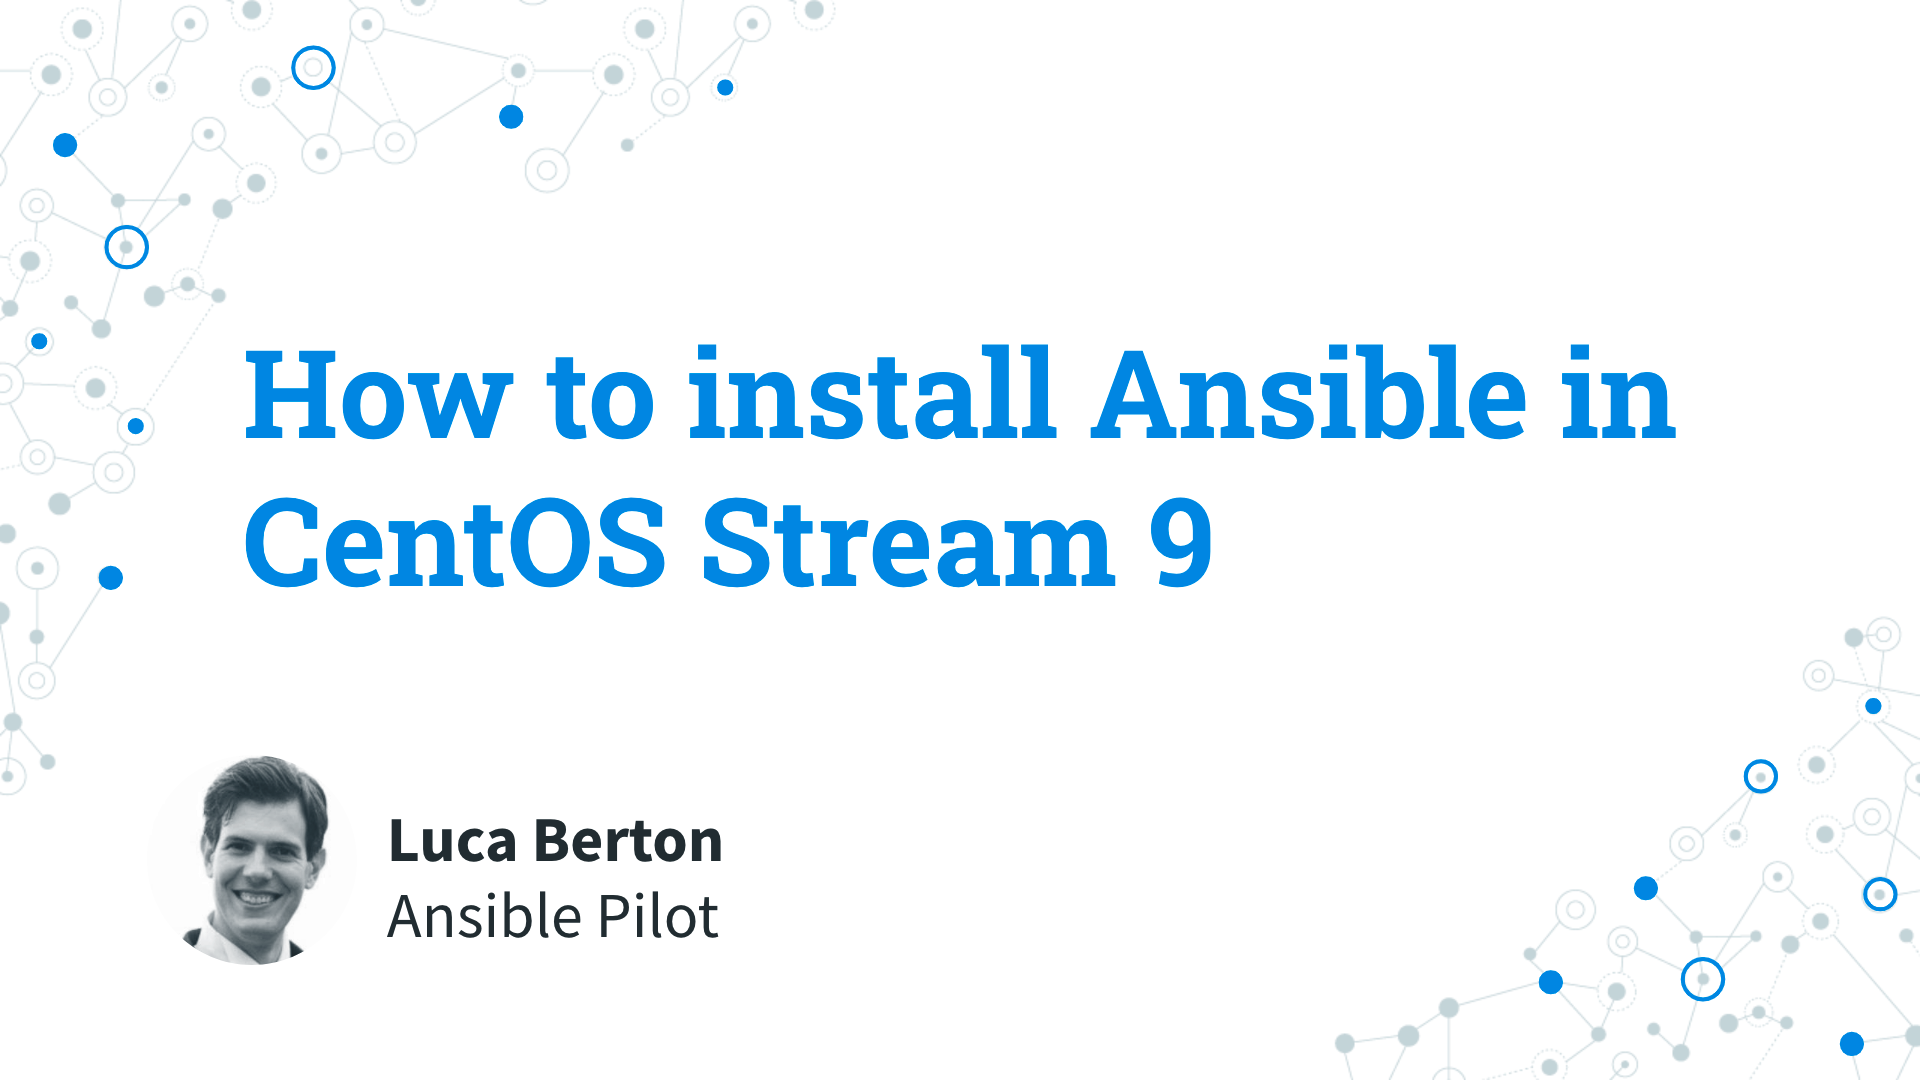 How to install Ansible in CentOS 9 Stream - Ansible install